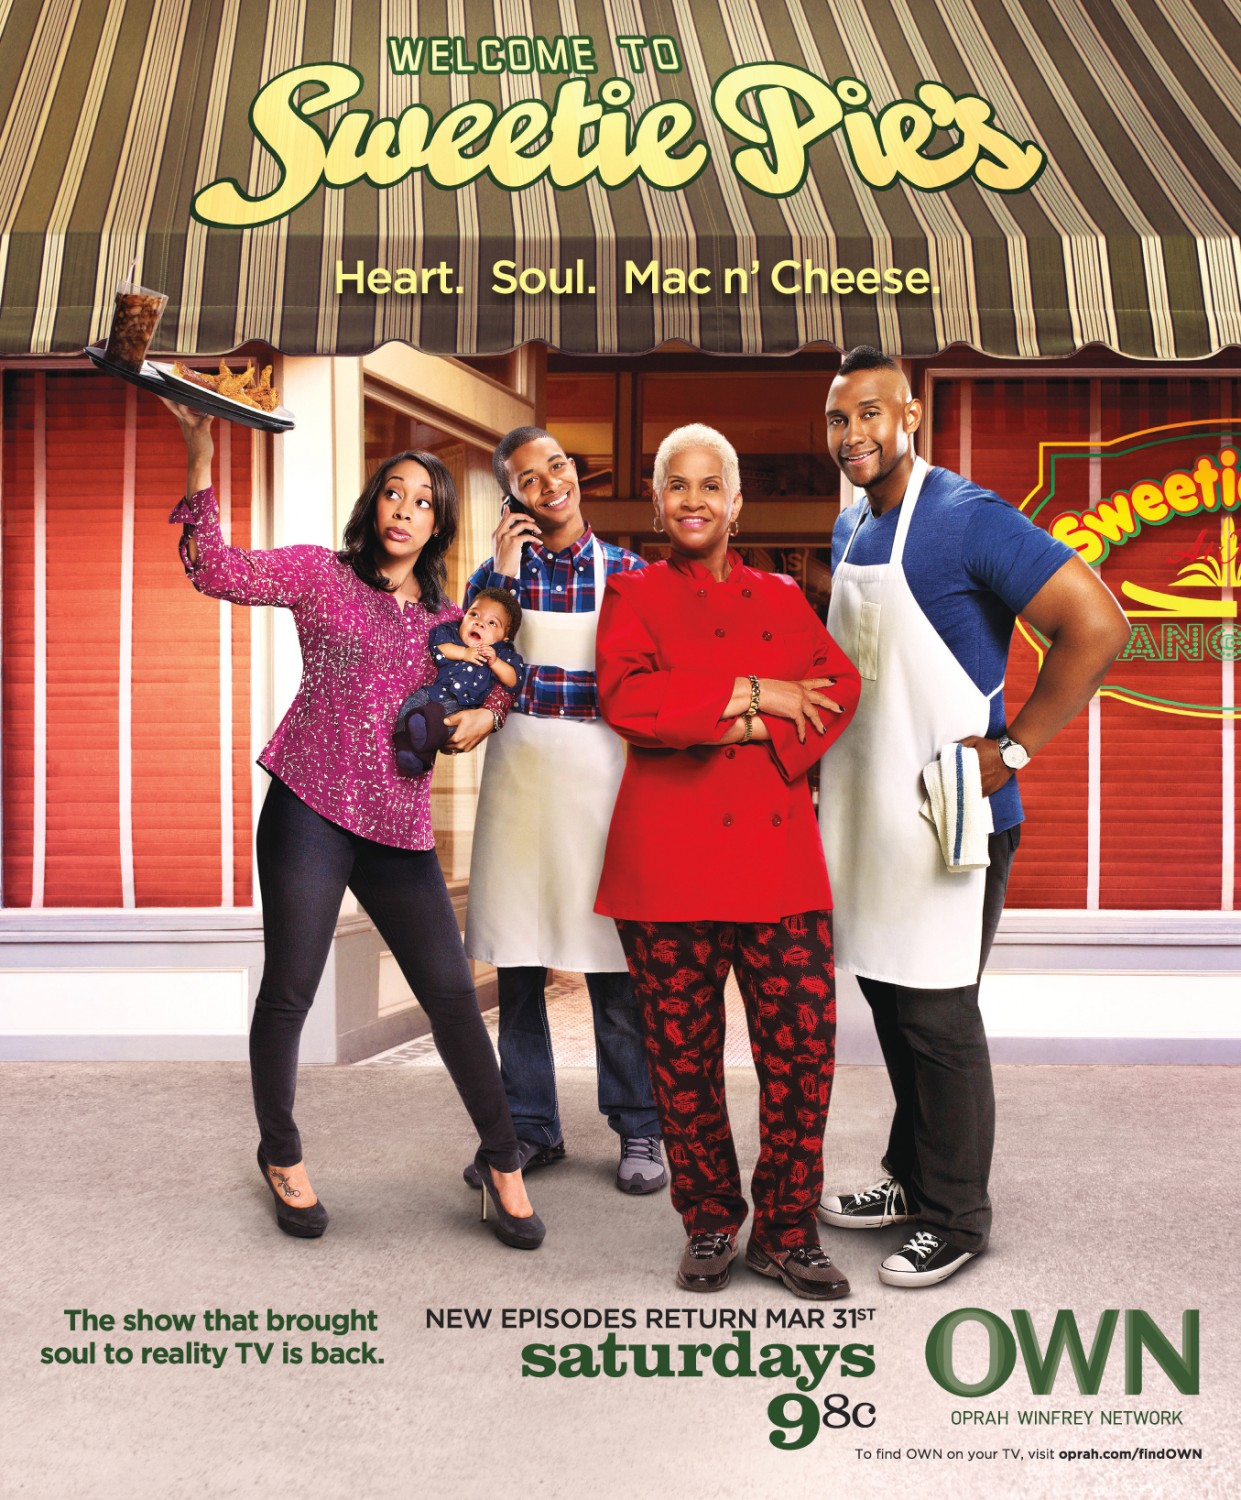 Extra Large TV Poster Image for Welcome to Sweetie Pie's 